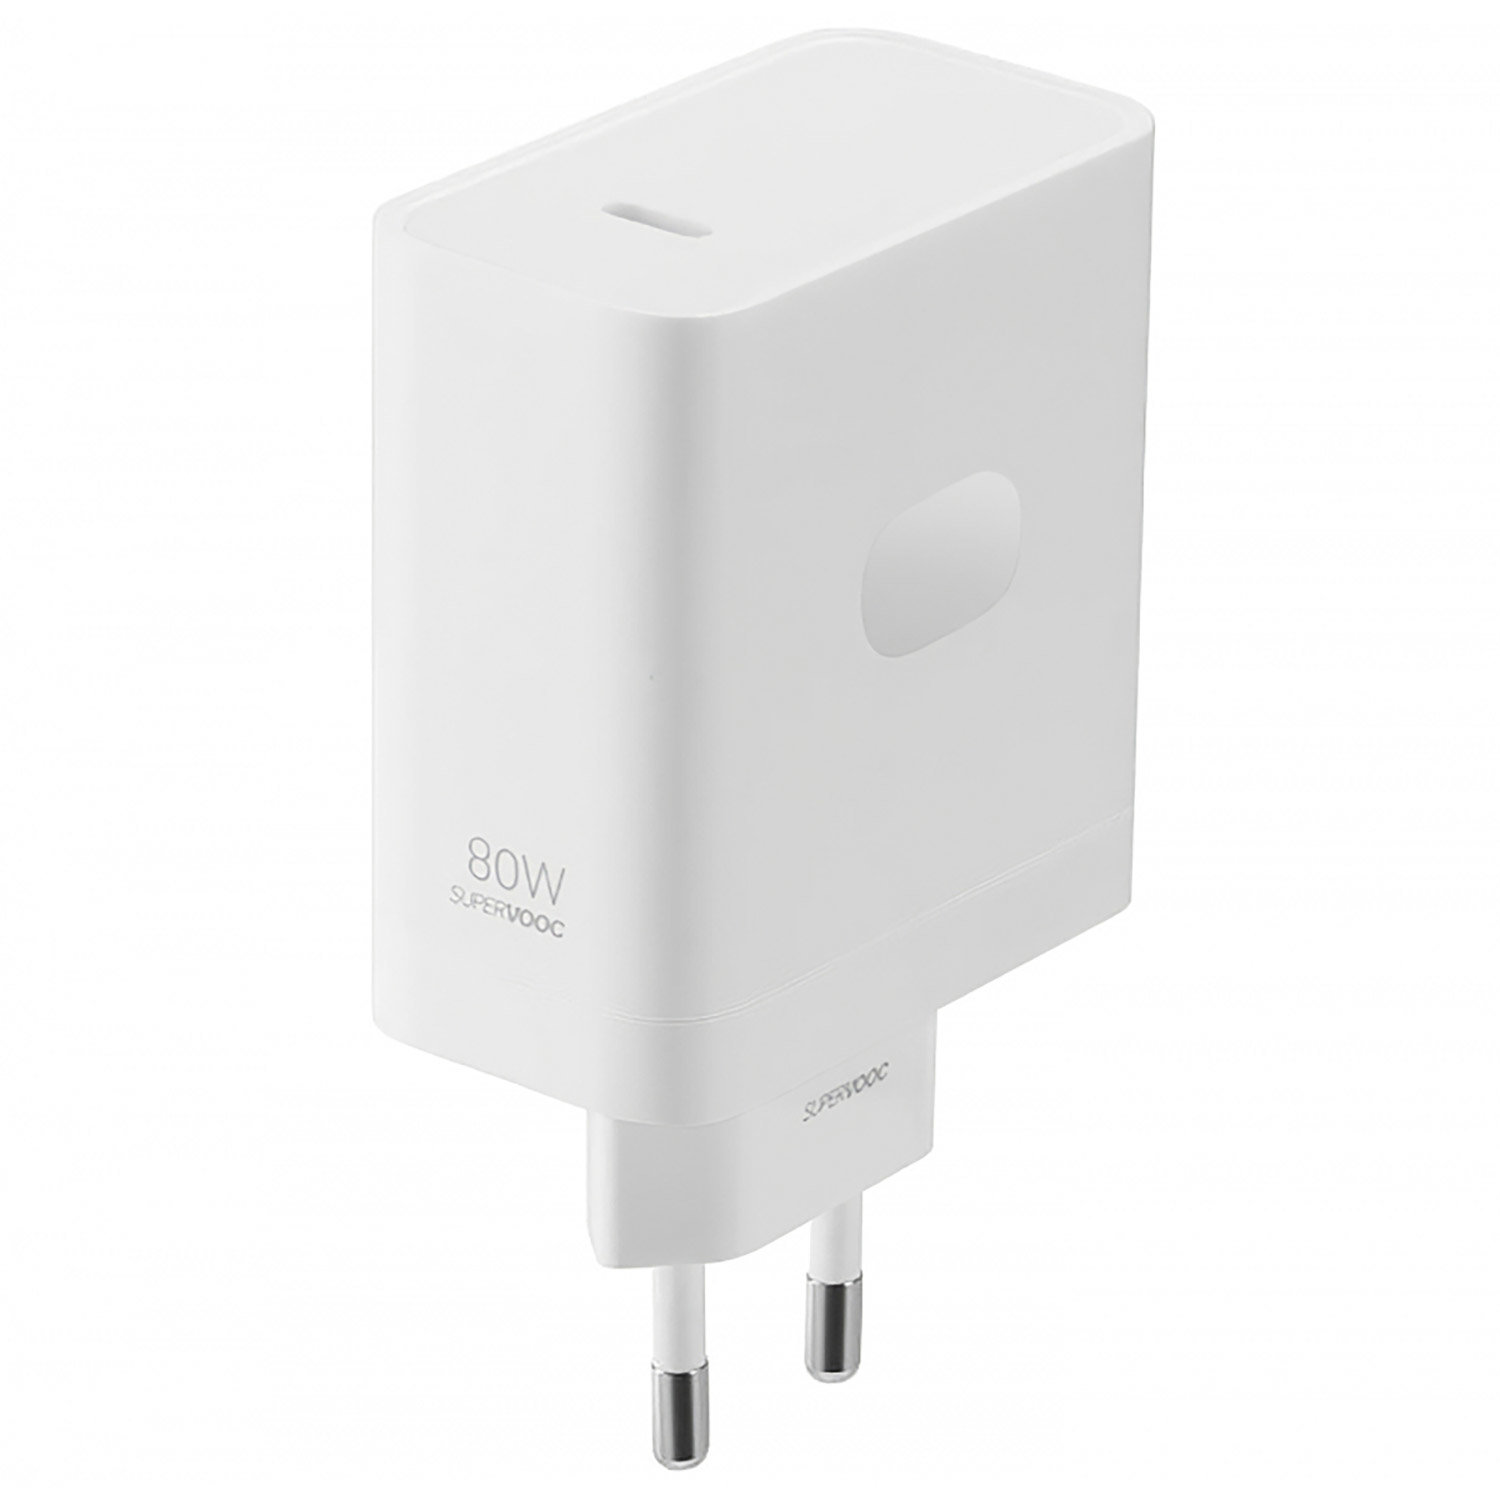 Official OnePlus 80W White GaN USB-C EU Plug Wall Charger - For OnePlus 6T